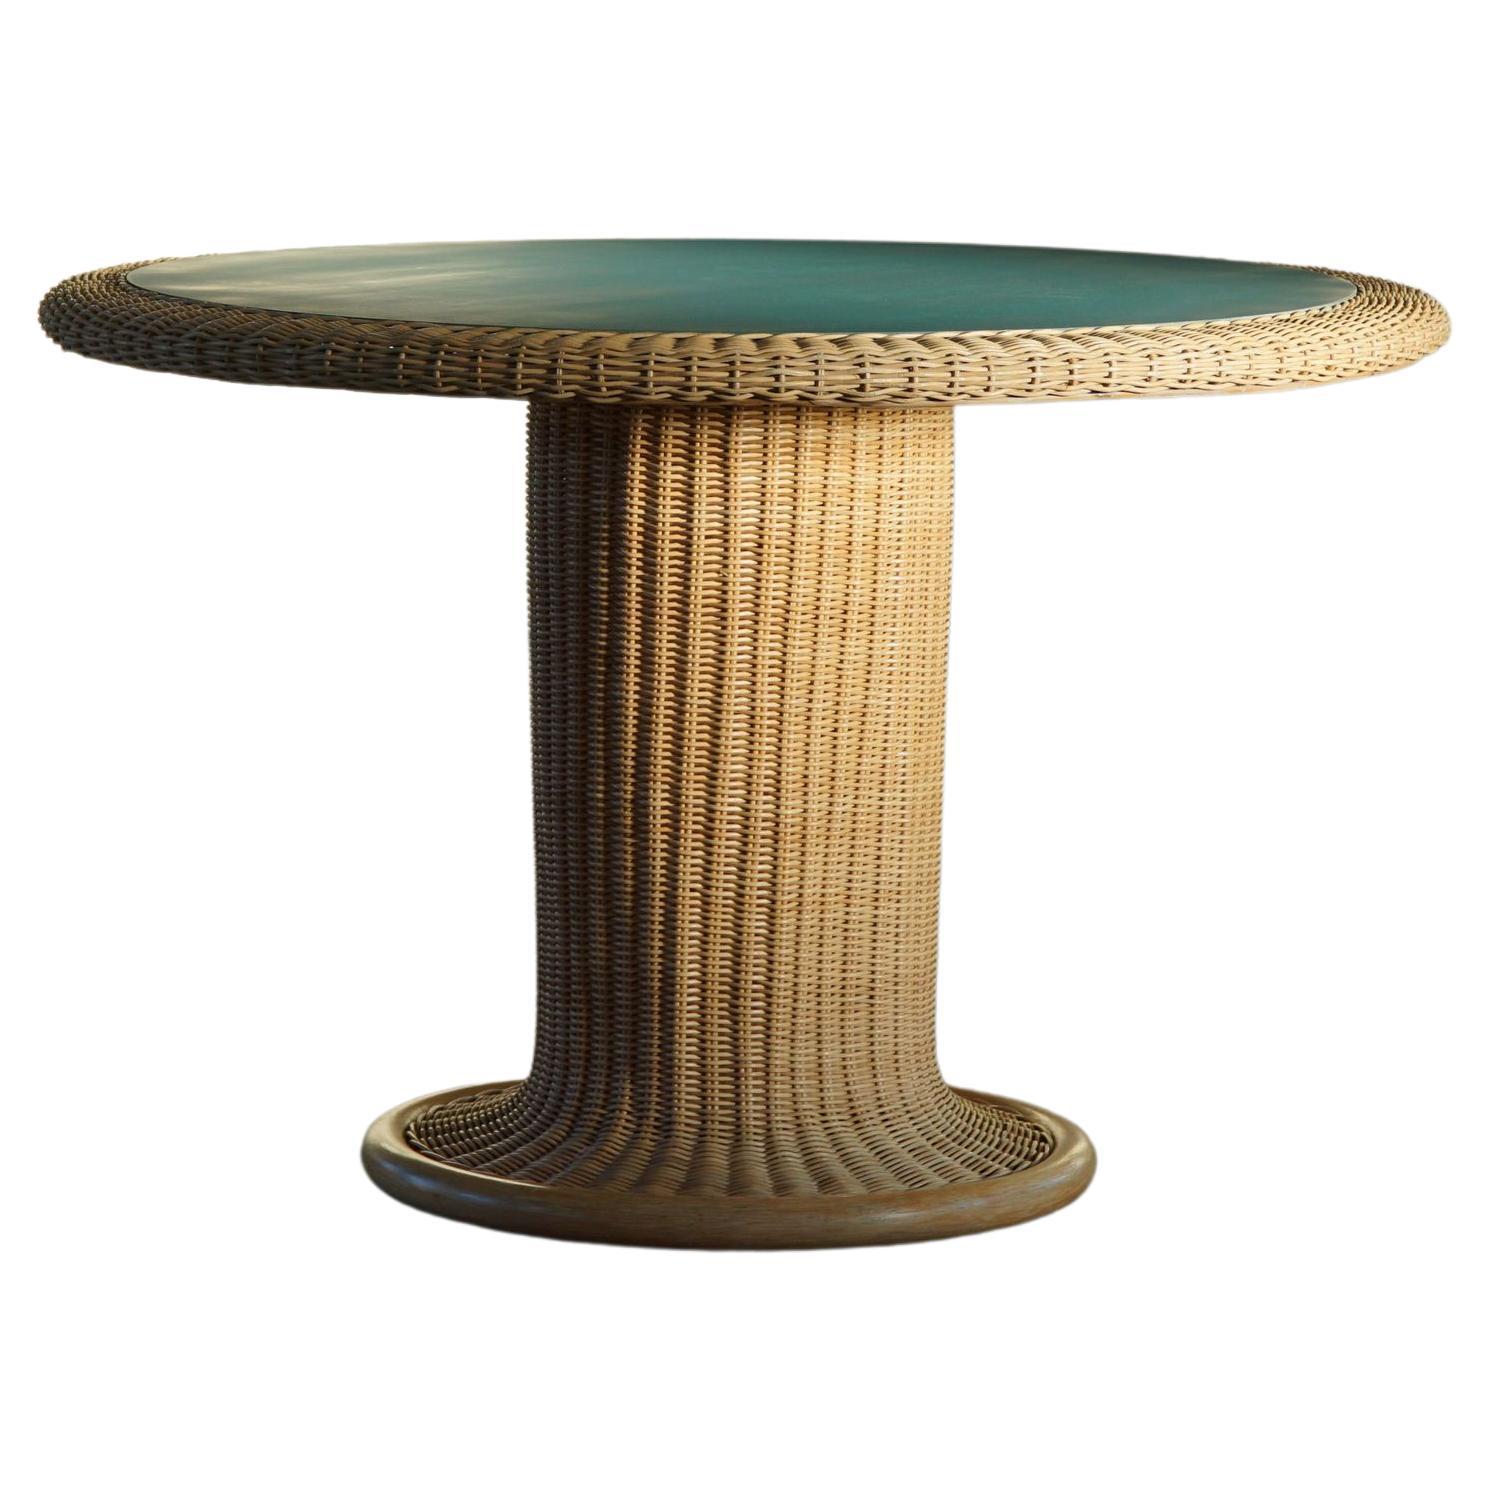 Vintage Italian Round Rattan Dining Table, Mid Century Modern, Made in 1970s